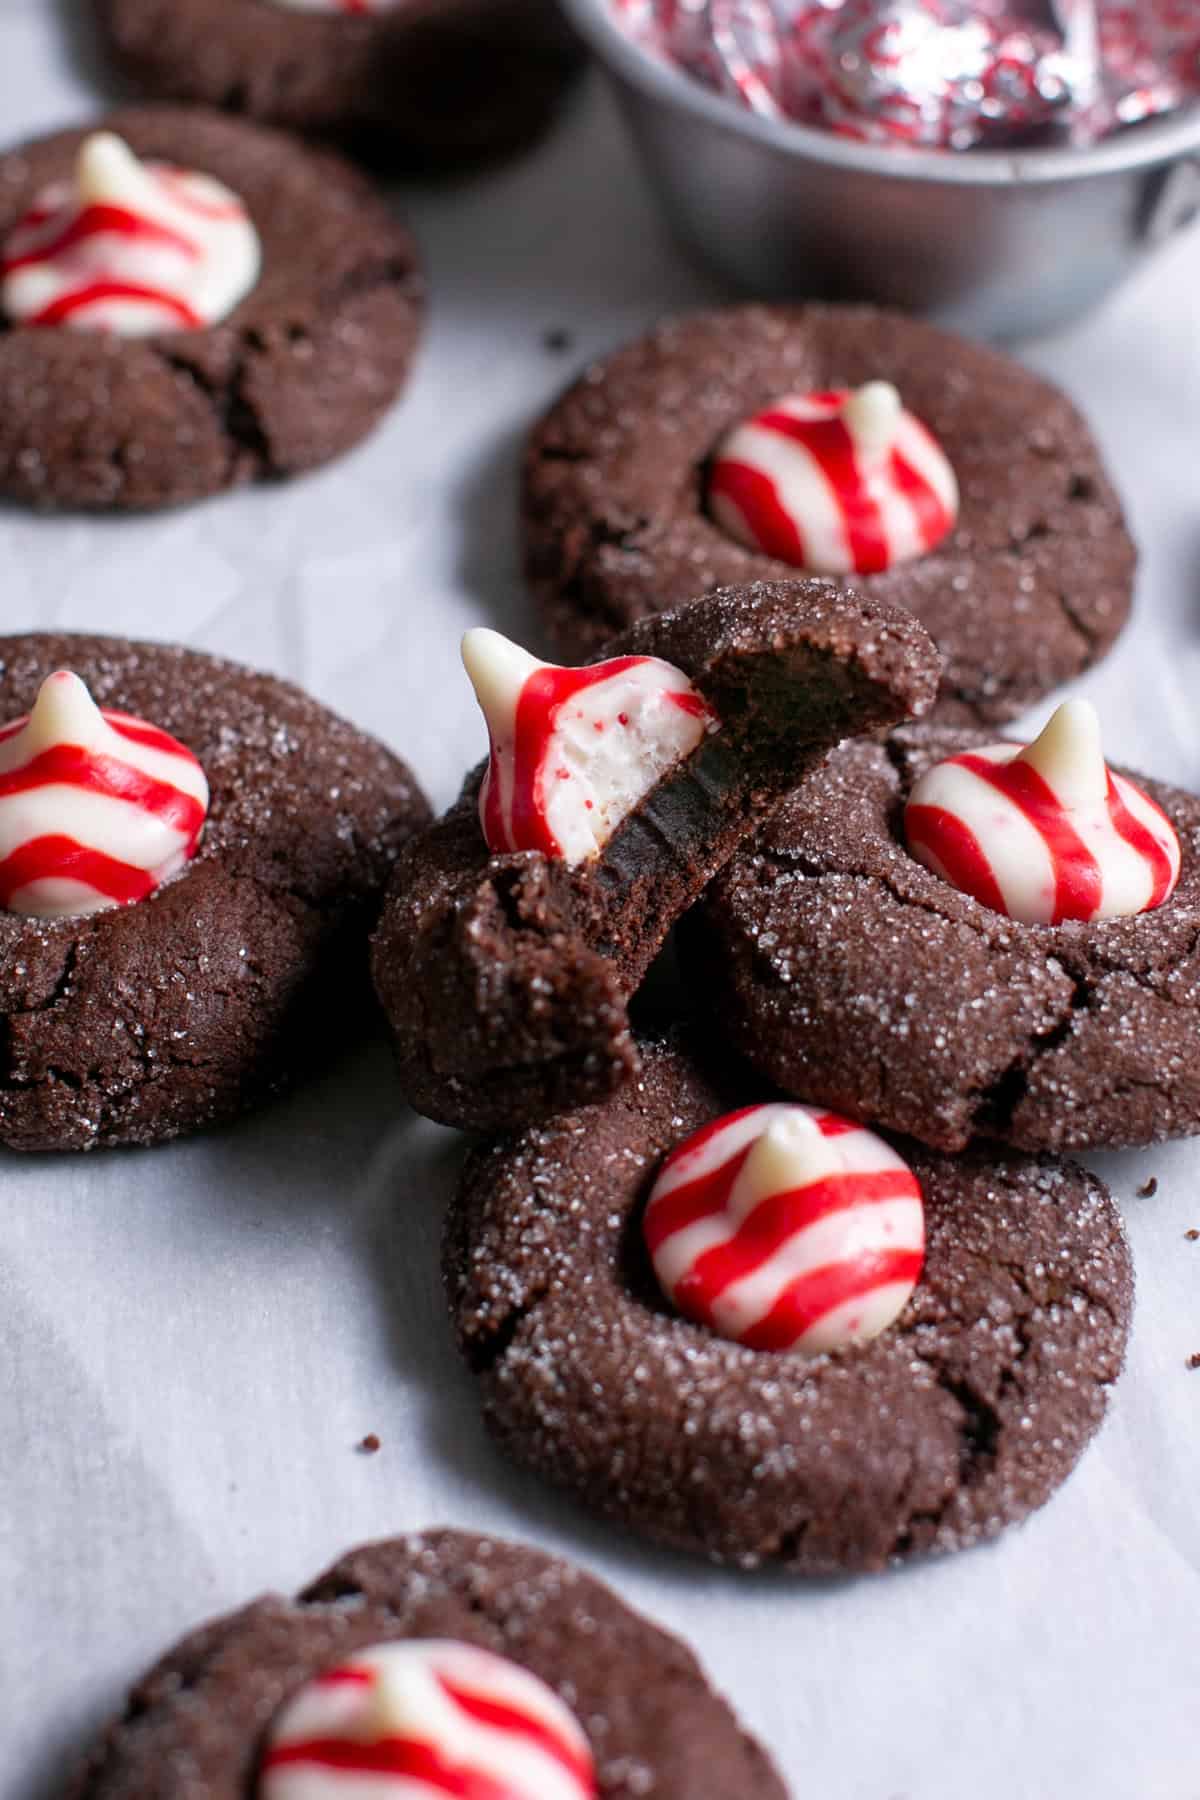 Chocolate Peppermint Blossoms with a bite missing.